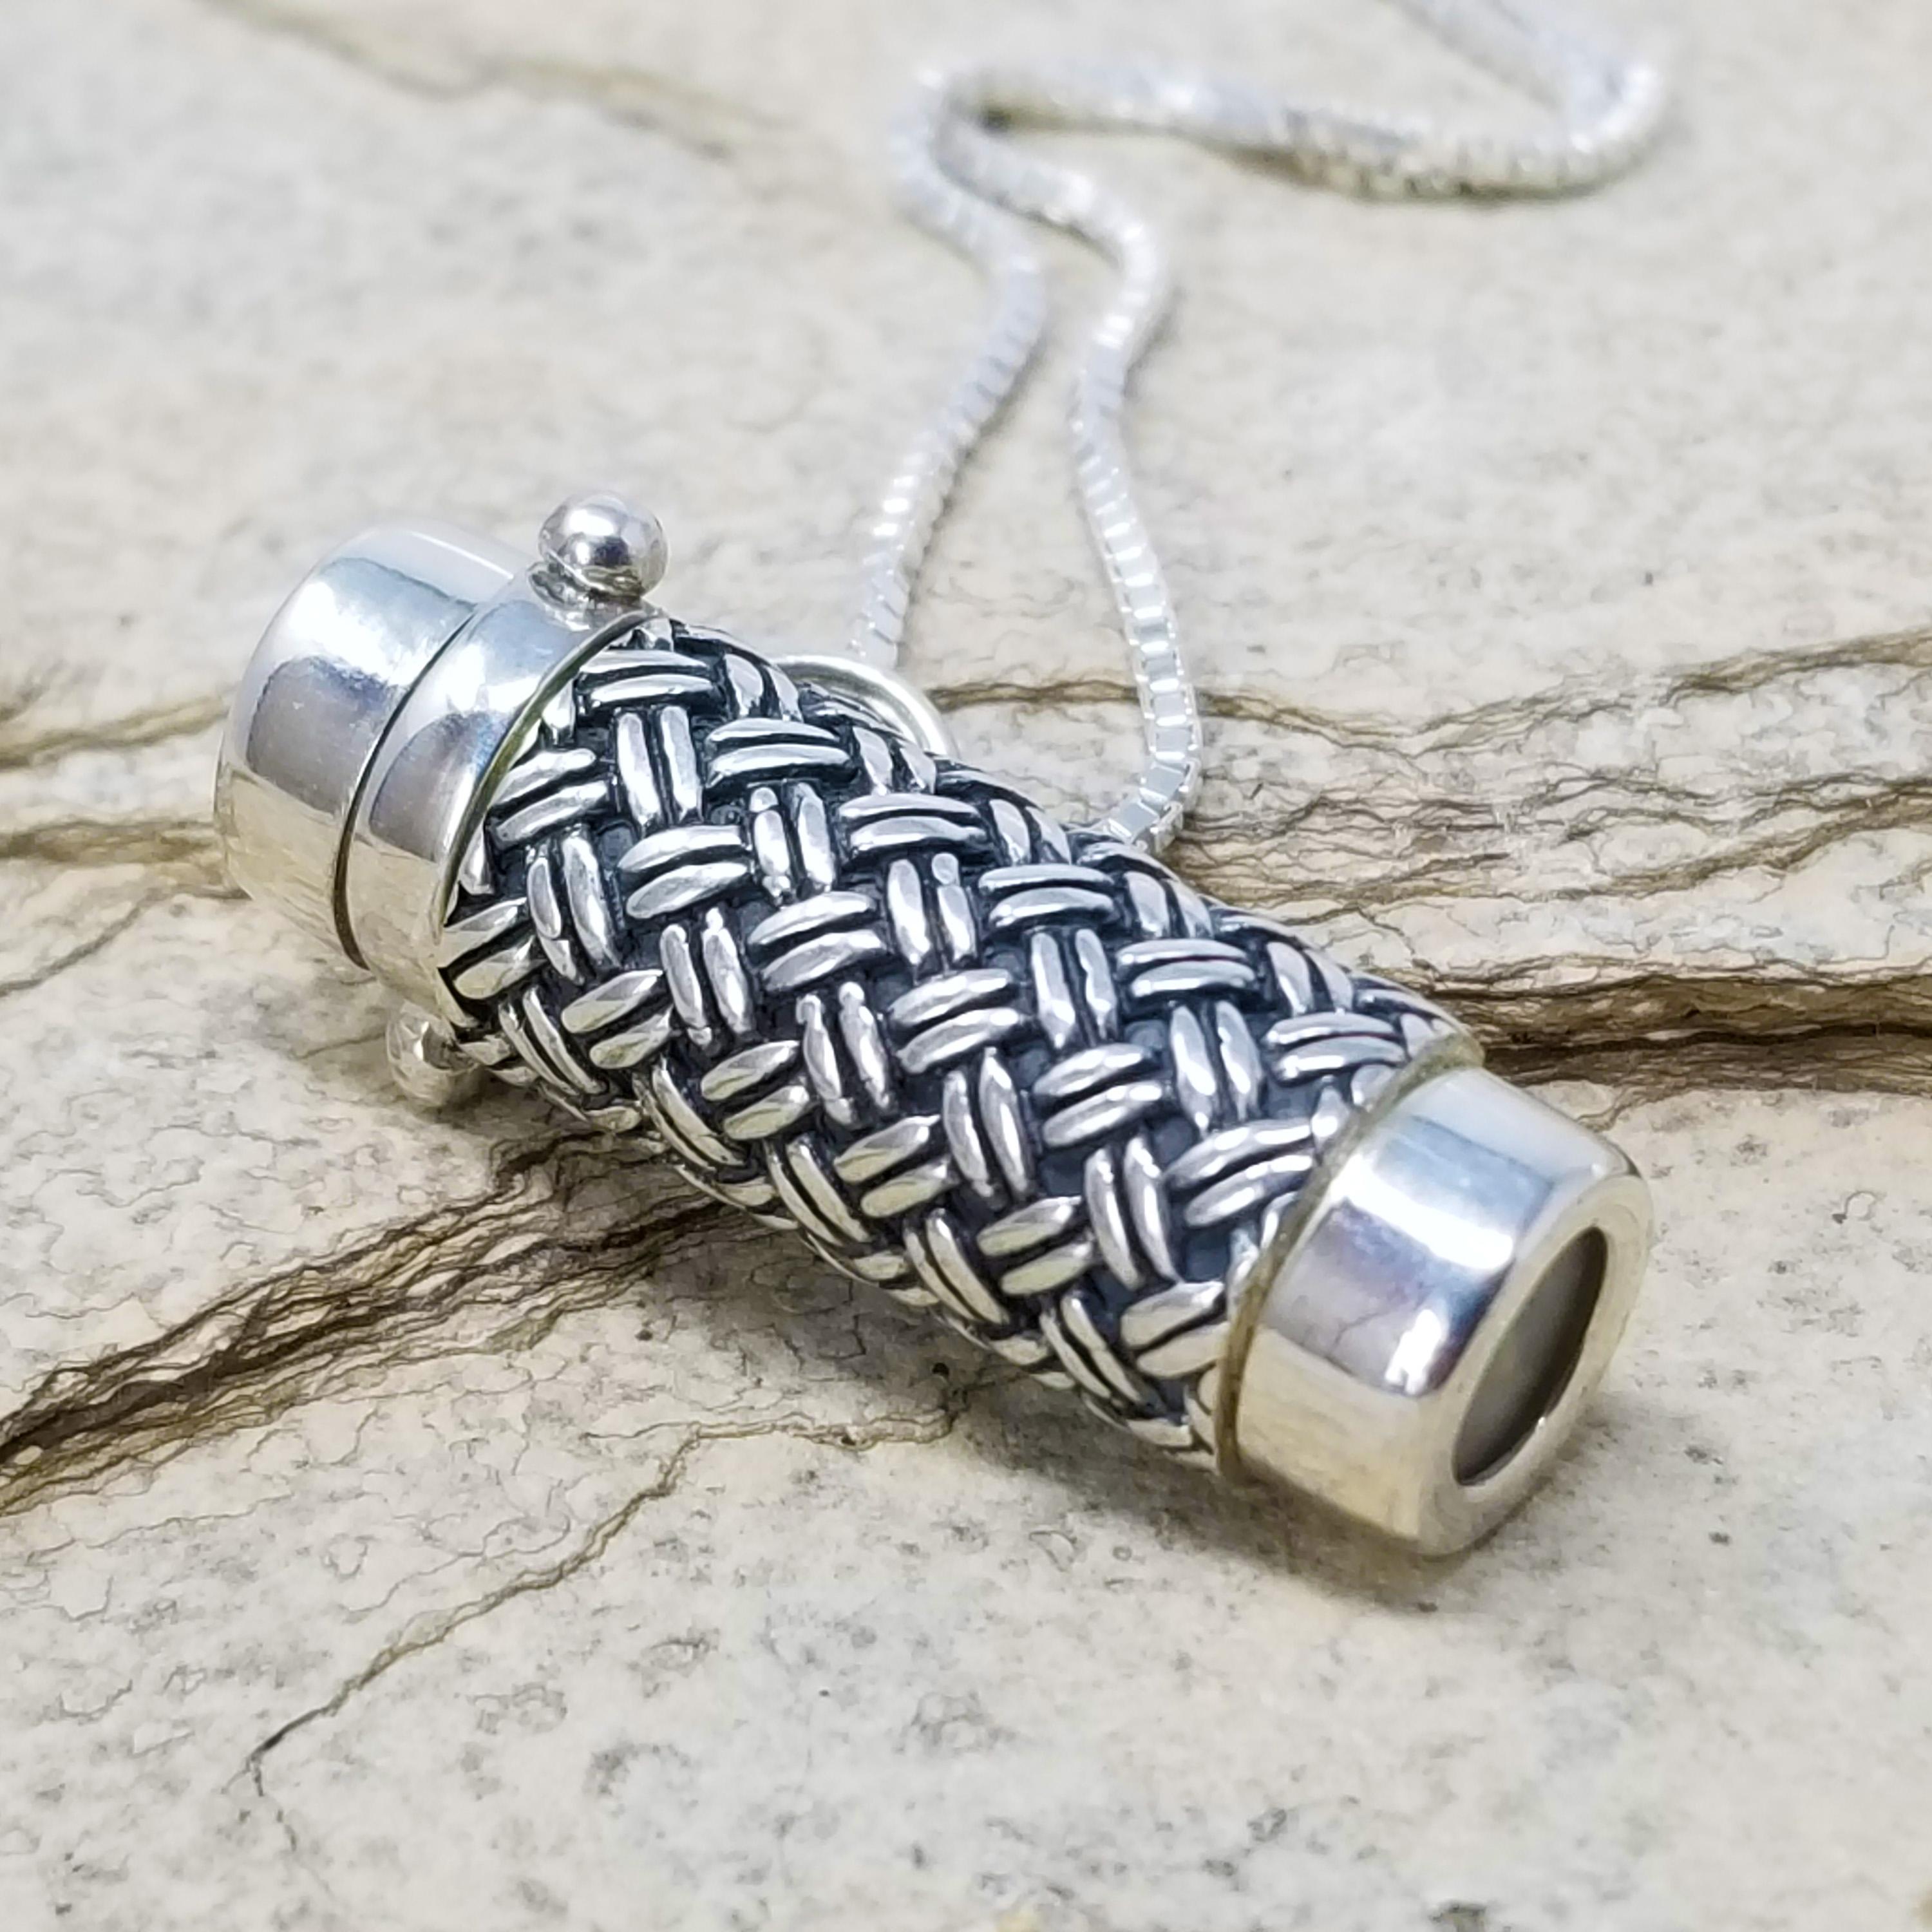 This kaleidoscope necklace features an intricately textured basketweave design. The slightly chunky styling of this style has a nice presence.

The optical system housed within this elegantly crafted kaleidoscope is superbly crafted. The classic